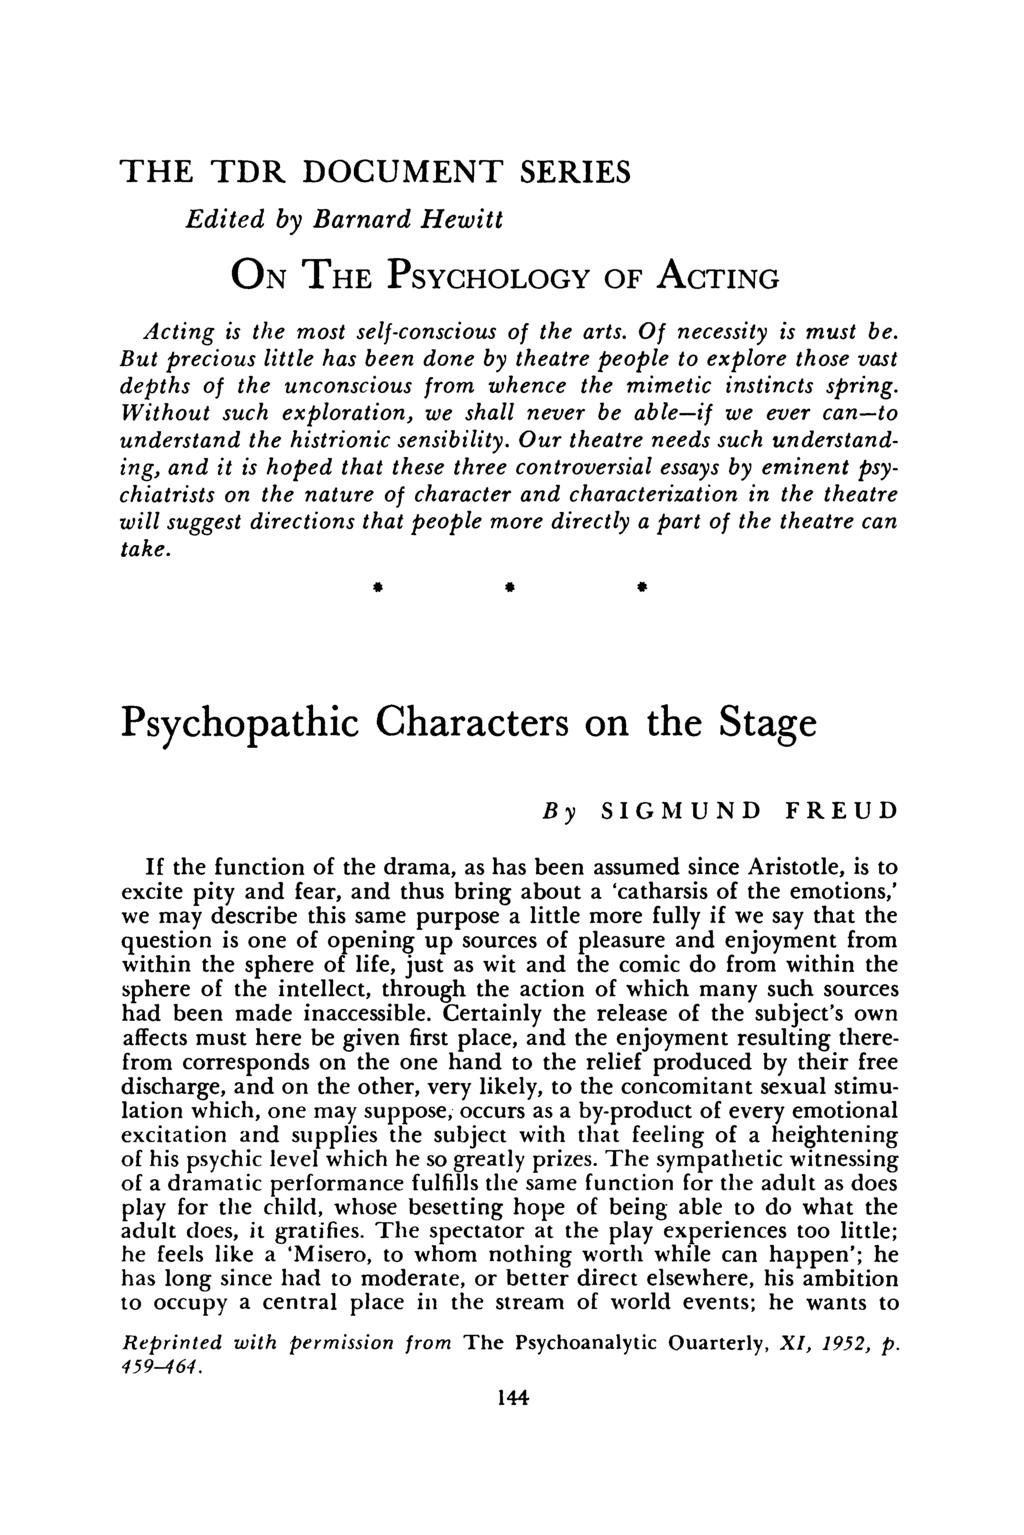 THE TDR DOCUMENT SERIES Edited by Barnard Hewitt ON THE PSYCHOLOGY OF ACTING Acting is the most self-conscious of the arts. Of necessity is must be.